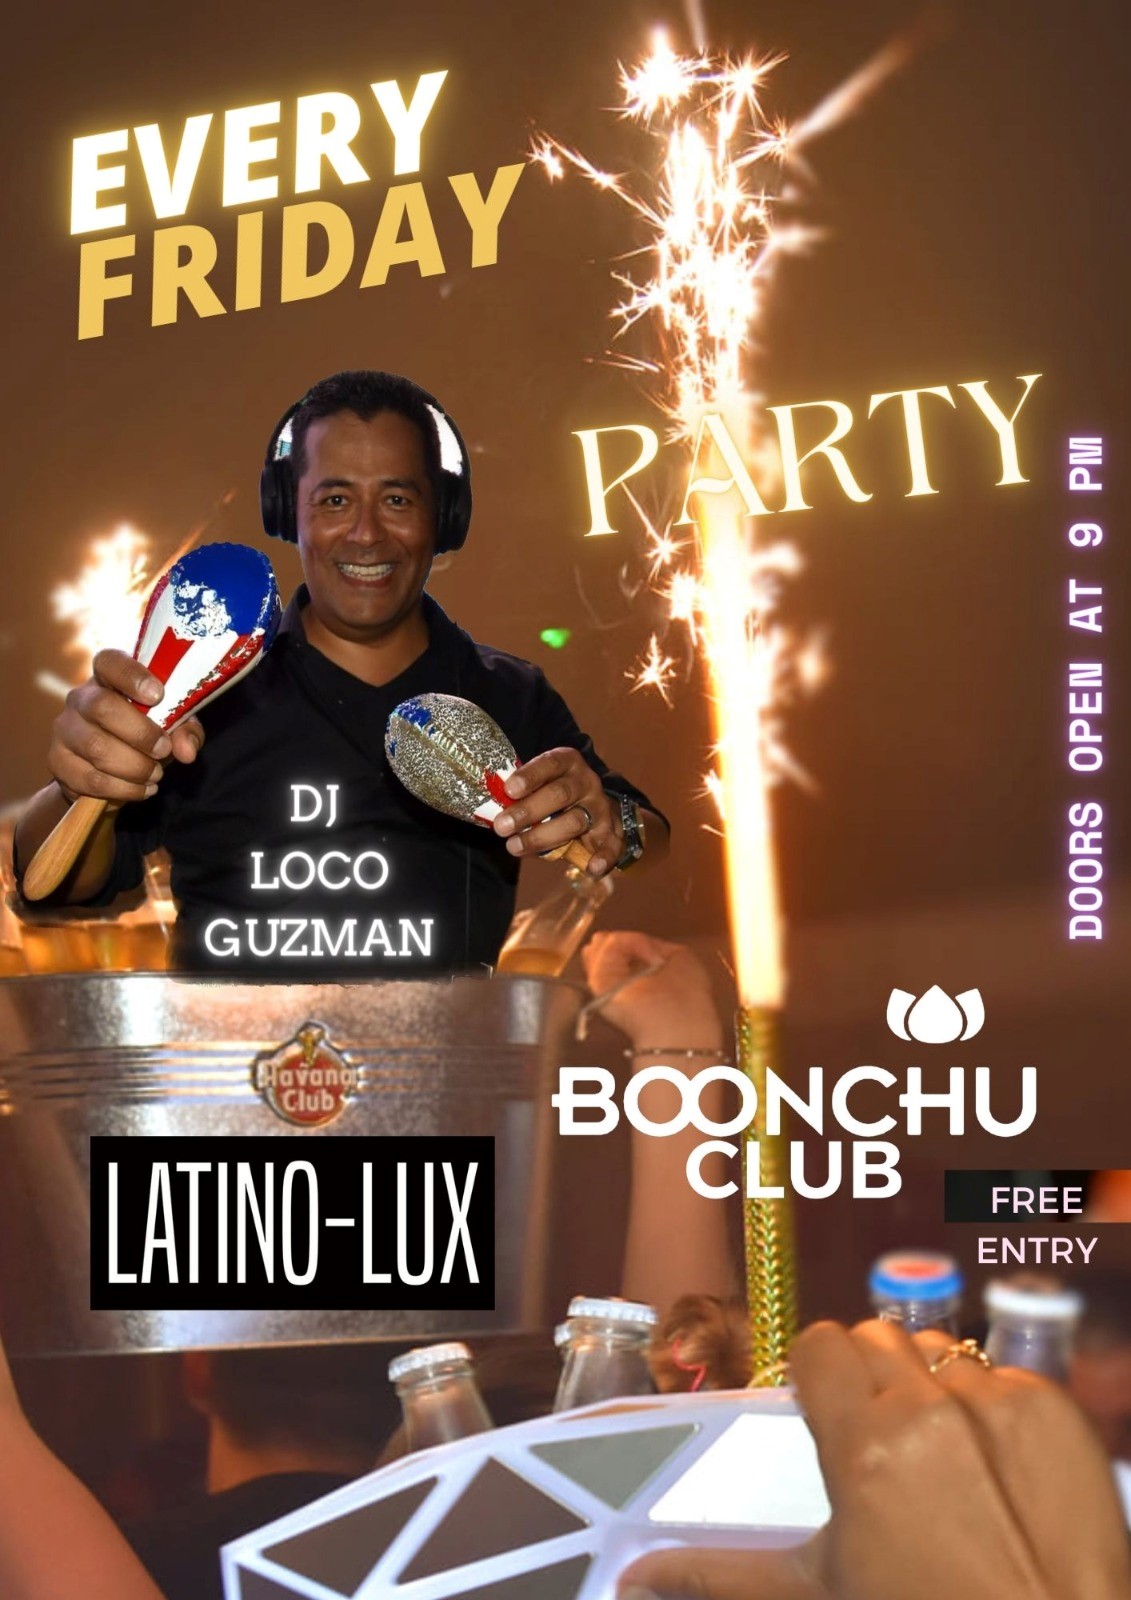 Latino lux party - ANNULE